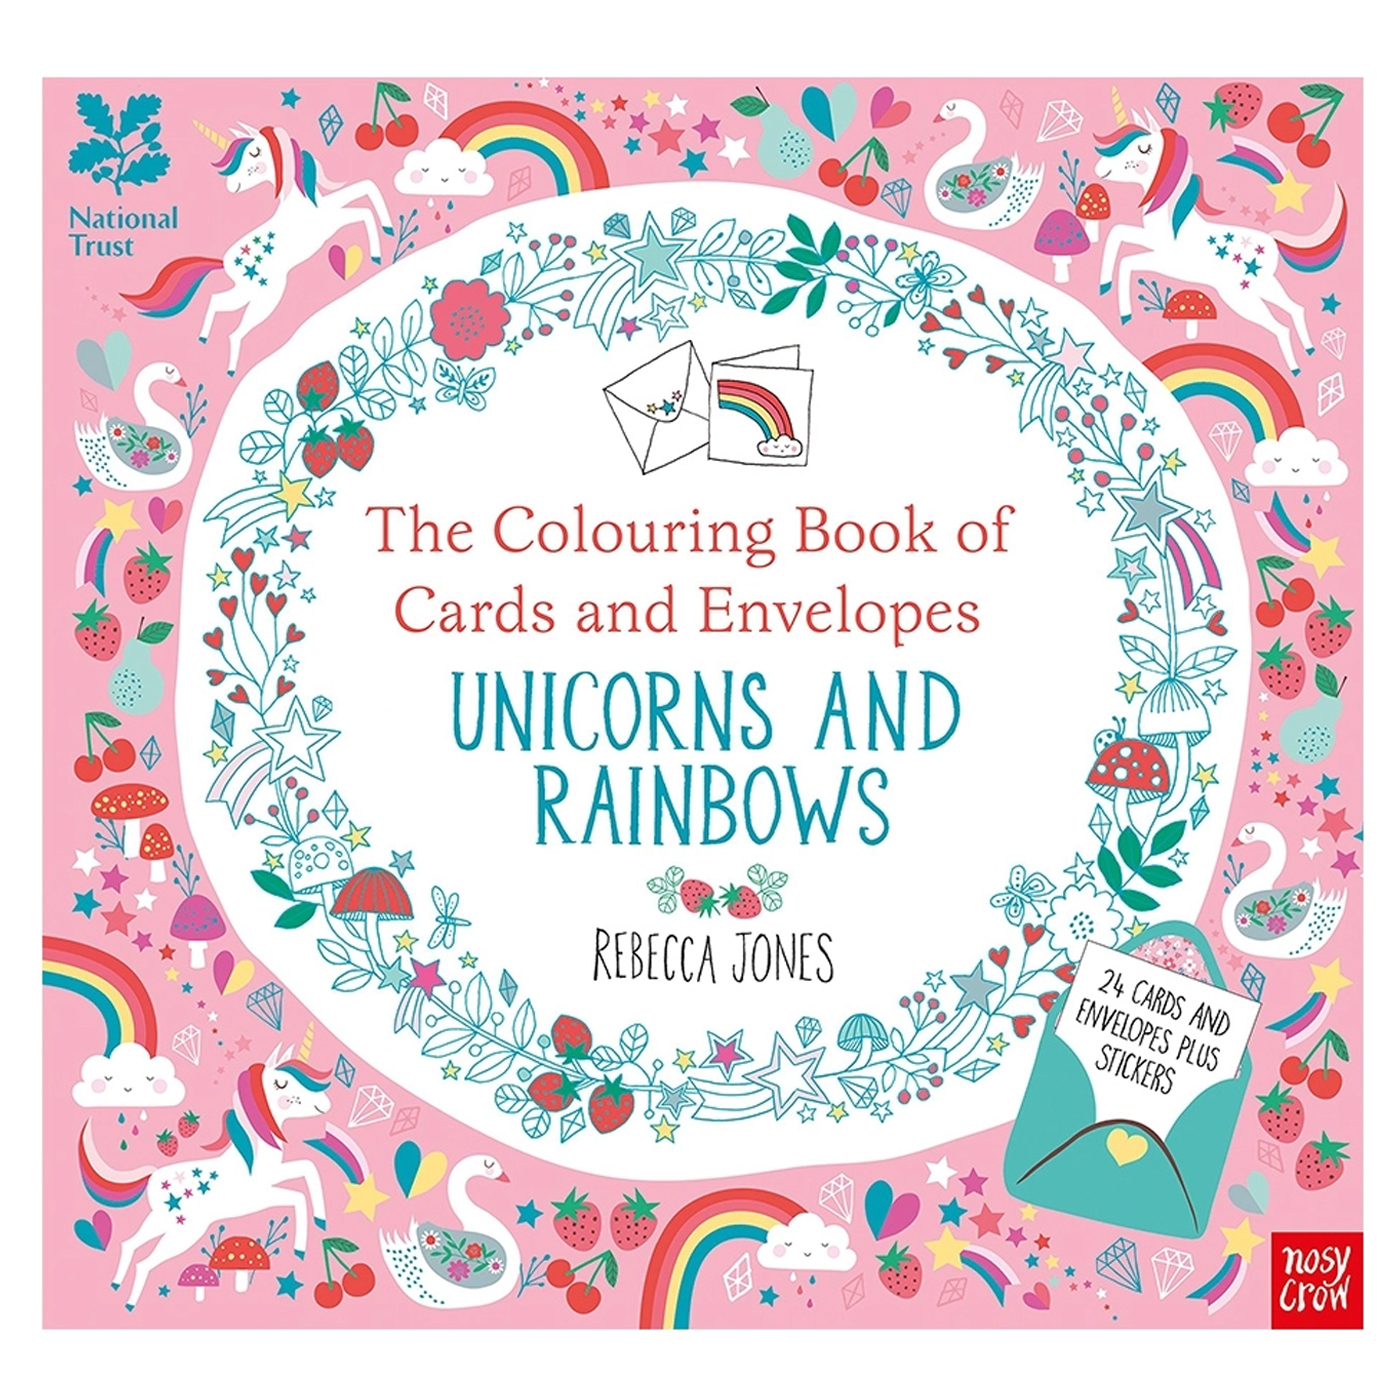  The Colouring Book of Cards and Envelopes Unicorns and Rainbows